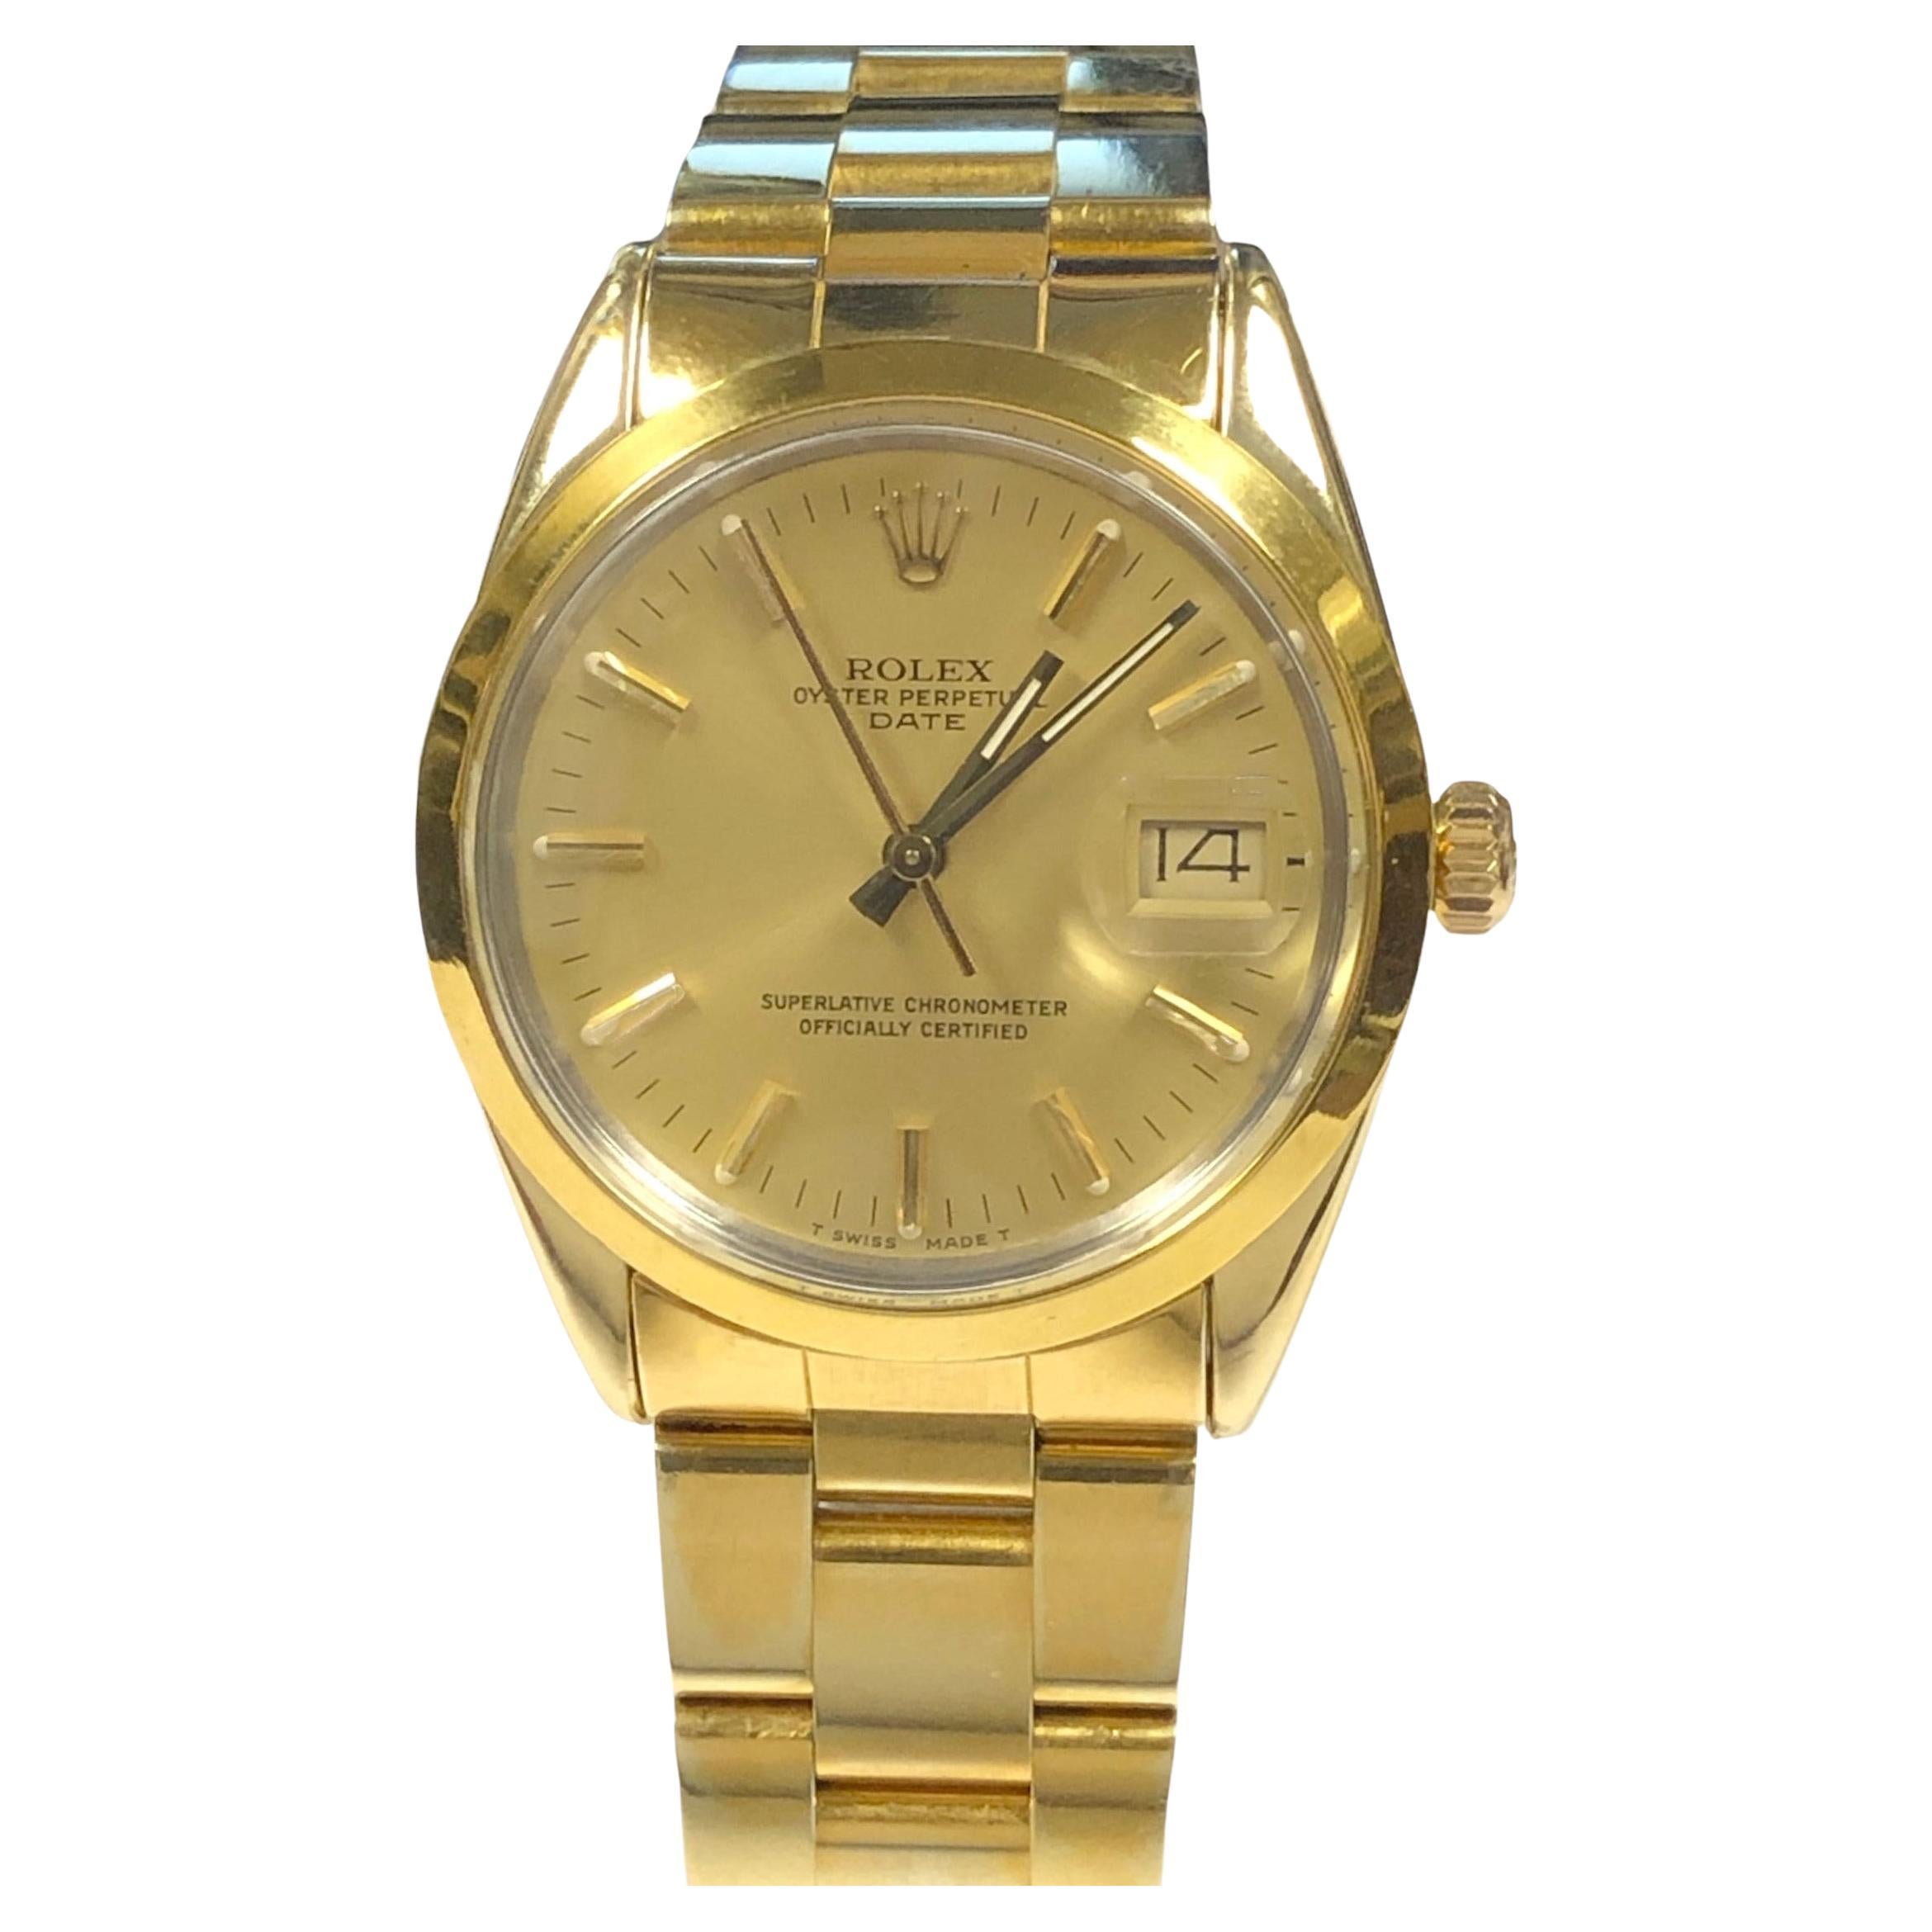 Rolex vintage 15505 Gold Shell Automatic Wrist Watch